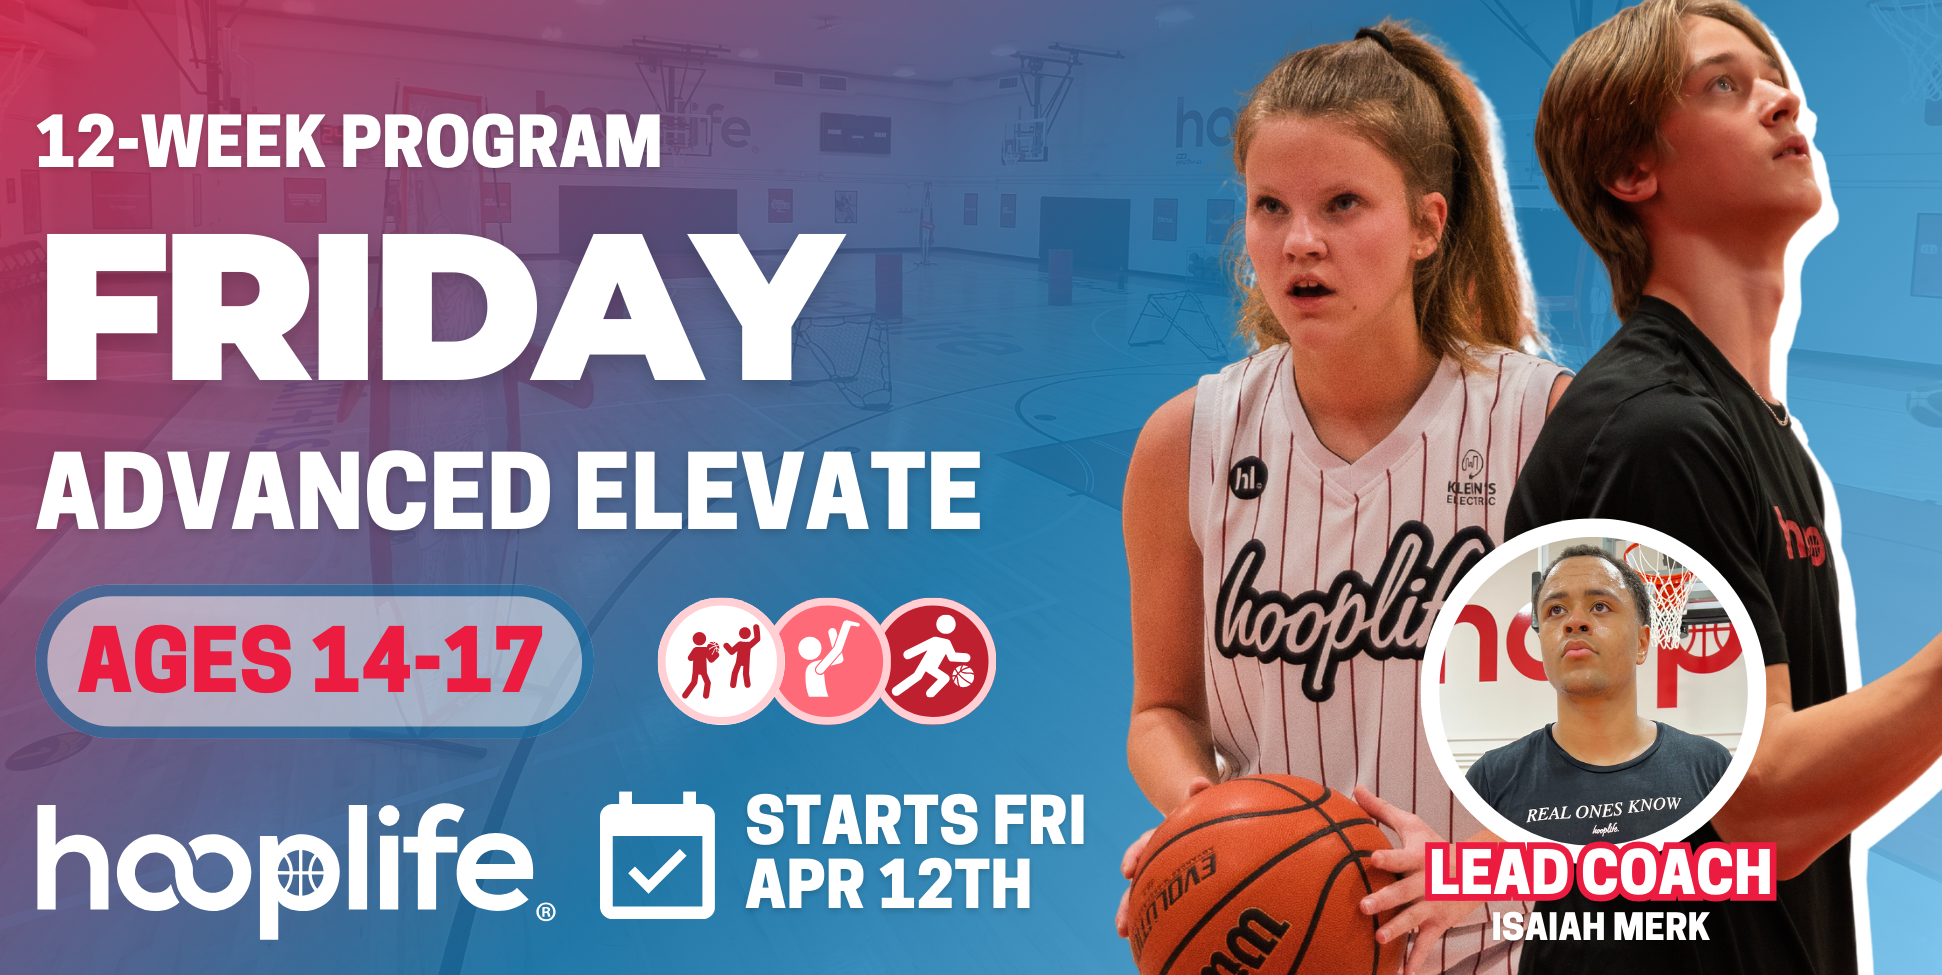 Ages 14-17 Friday Advanced Elevate Program